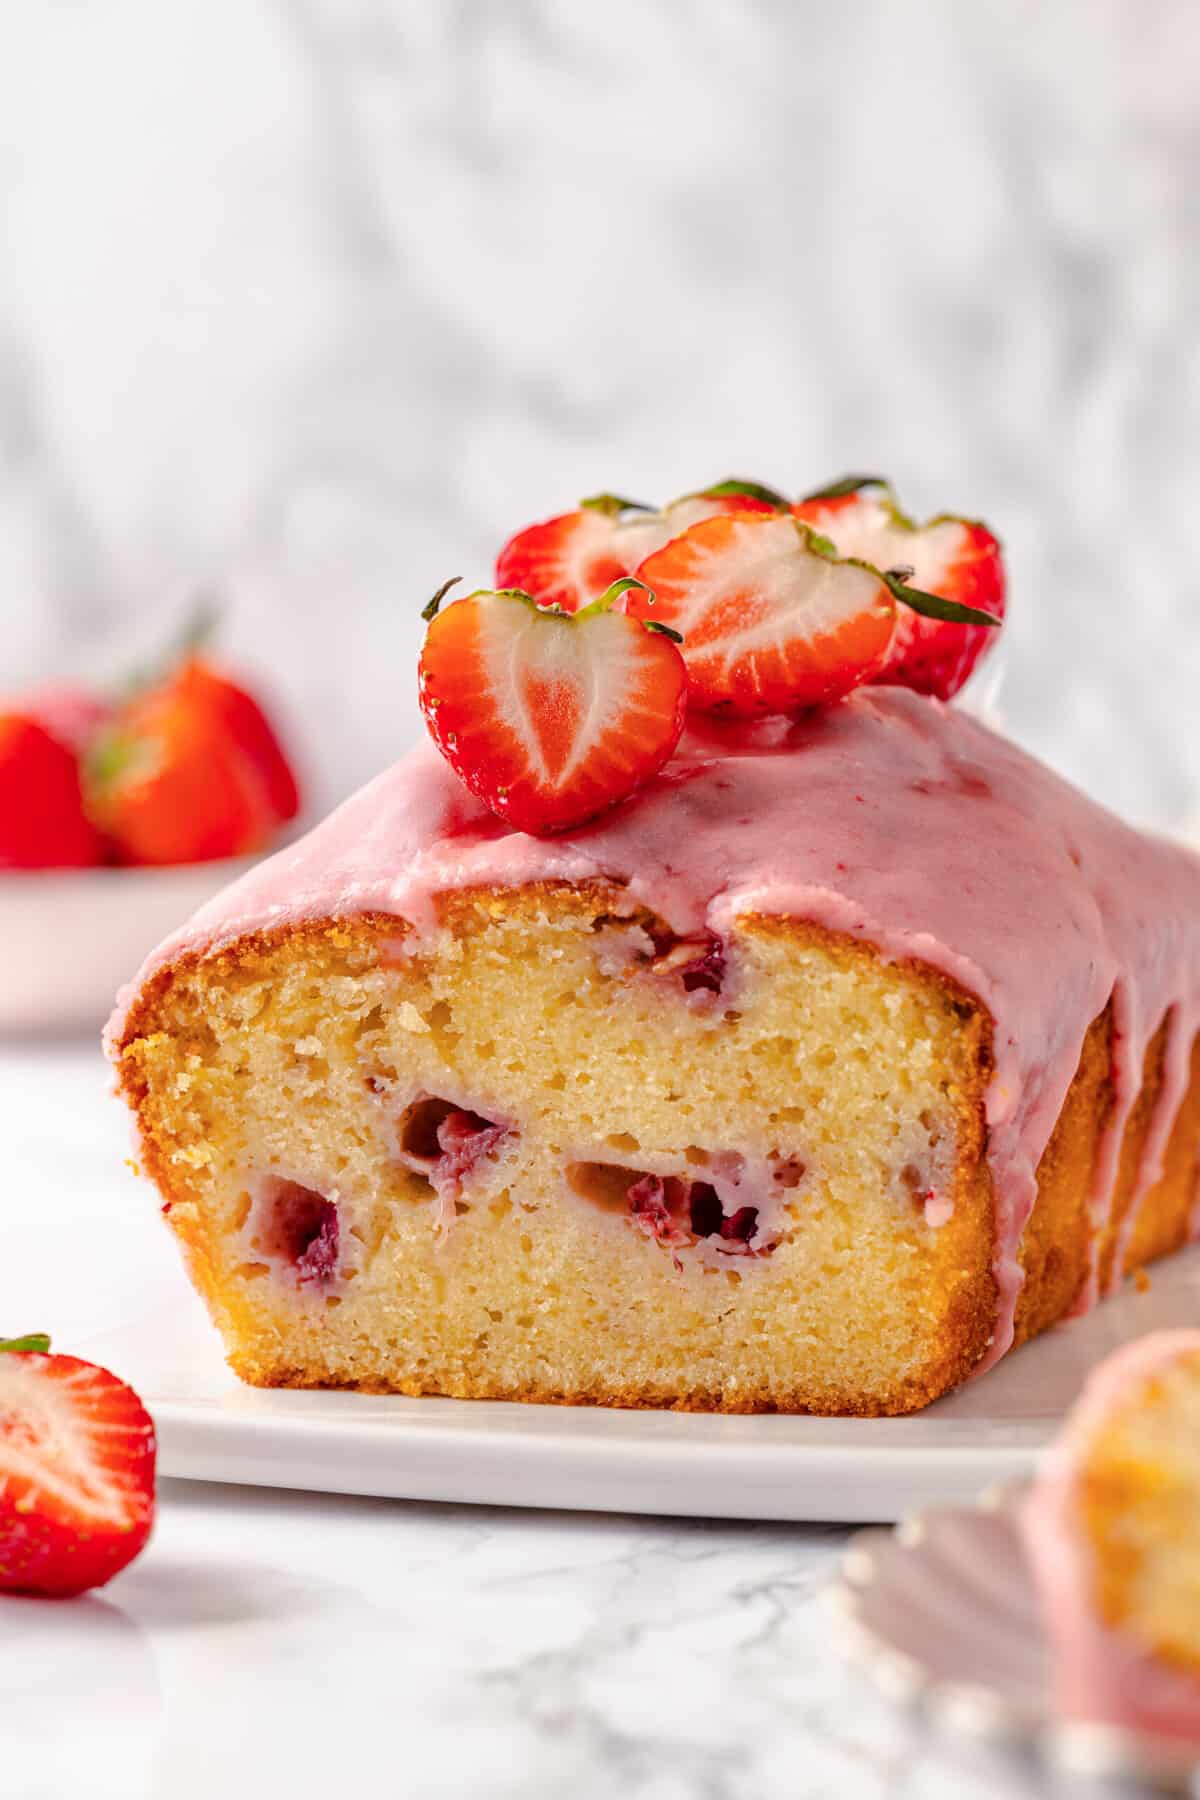 Close-up image, showing the cross-section of strawberry pound cake served on a white plate.